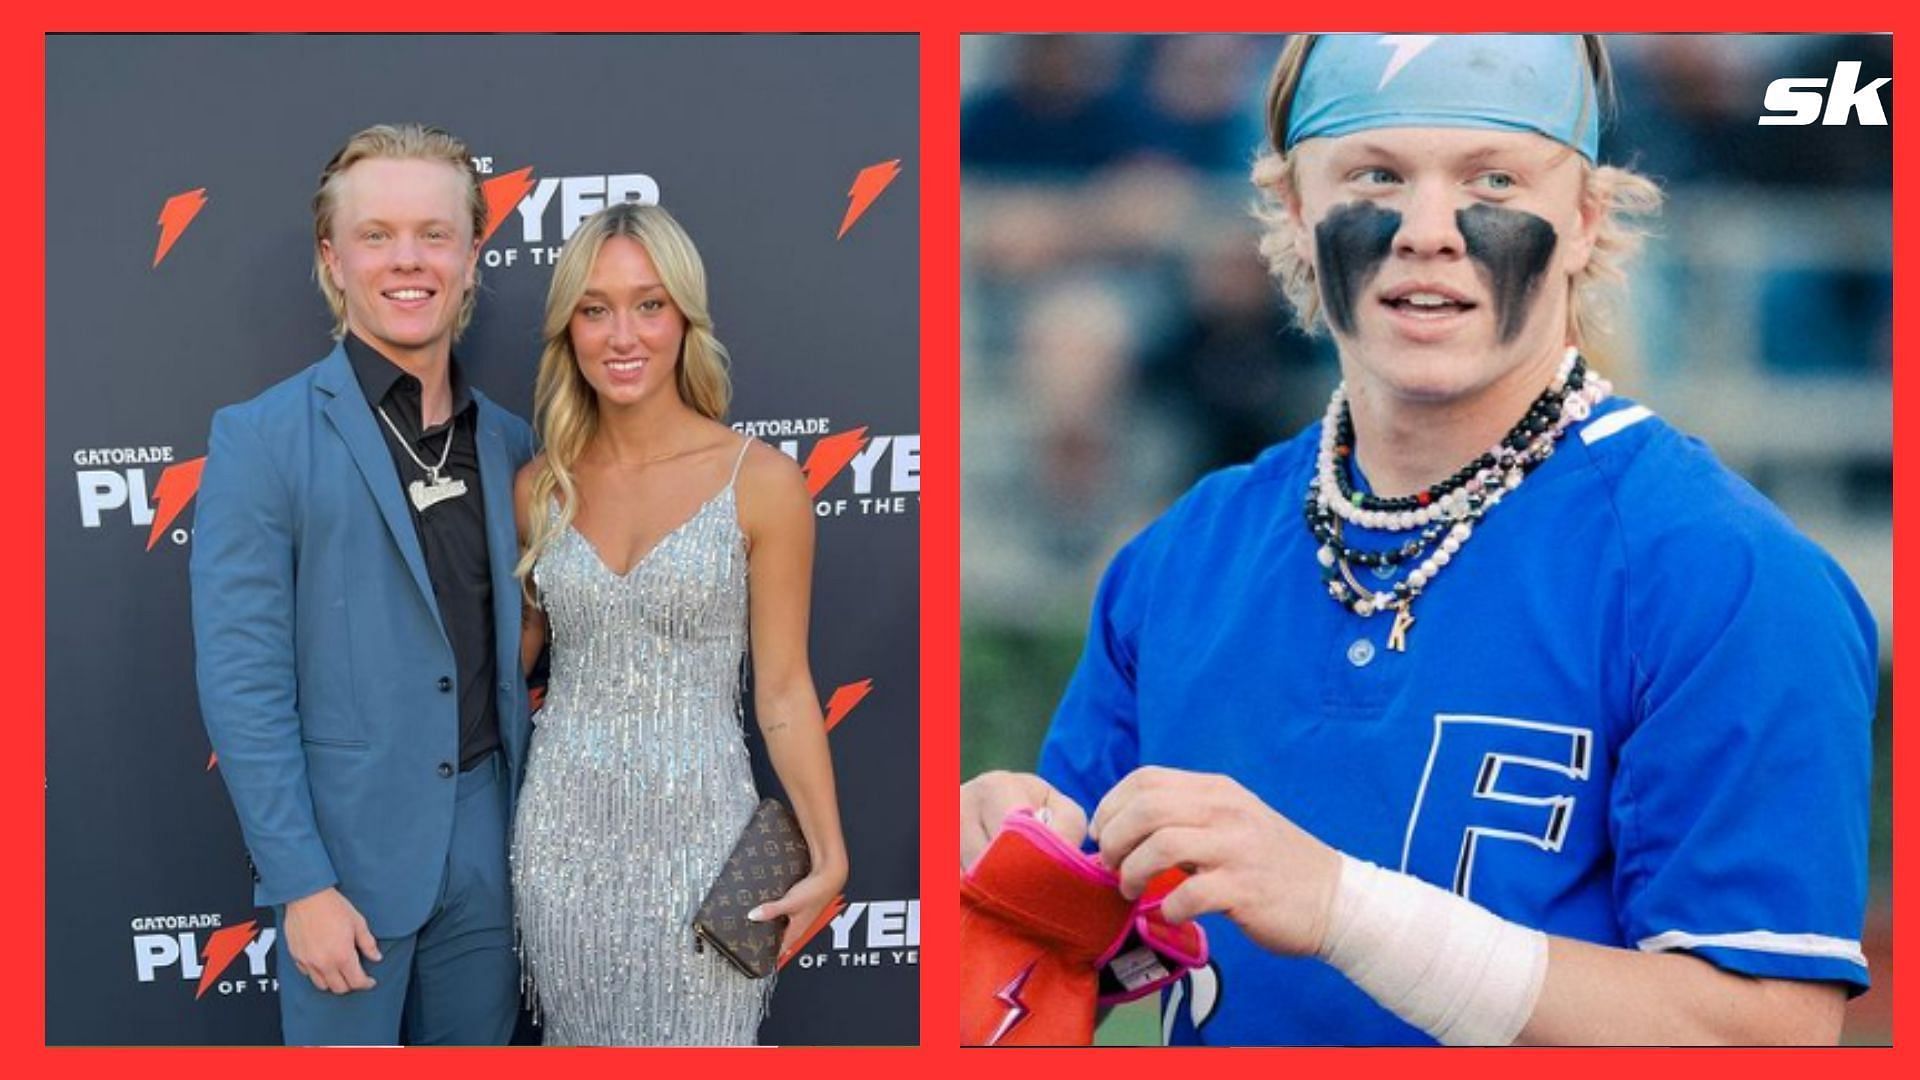 In Photos: Detroit Tigers draft pick Max Clark celebrates receiving the 2023 Gatorade Player of the Year Award with his girlfriend